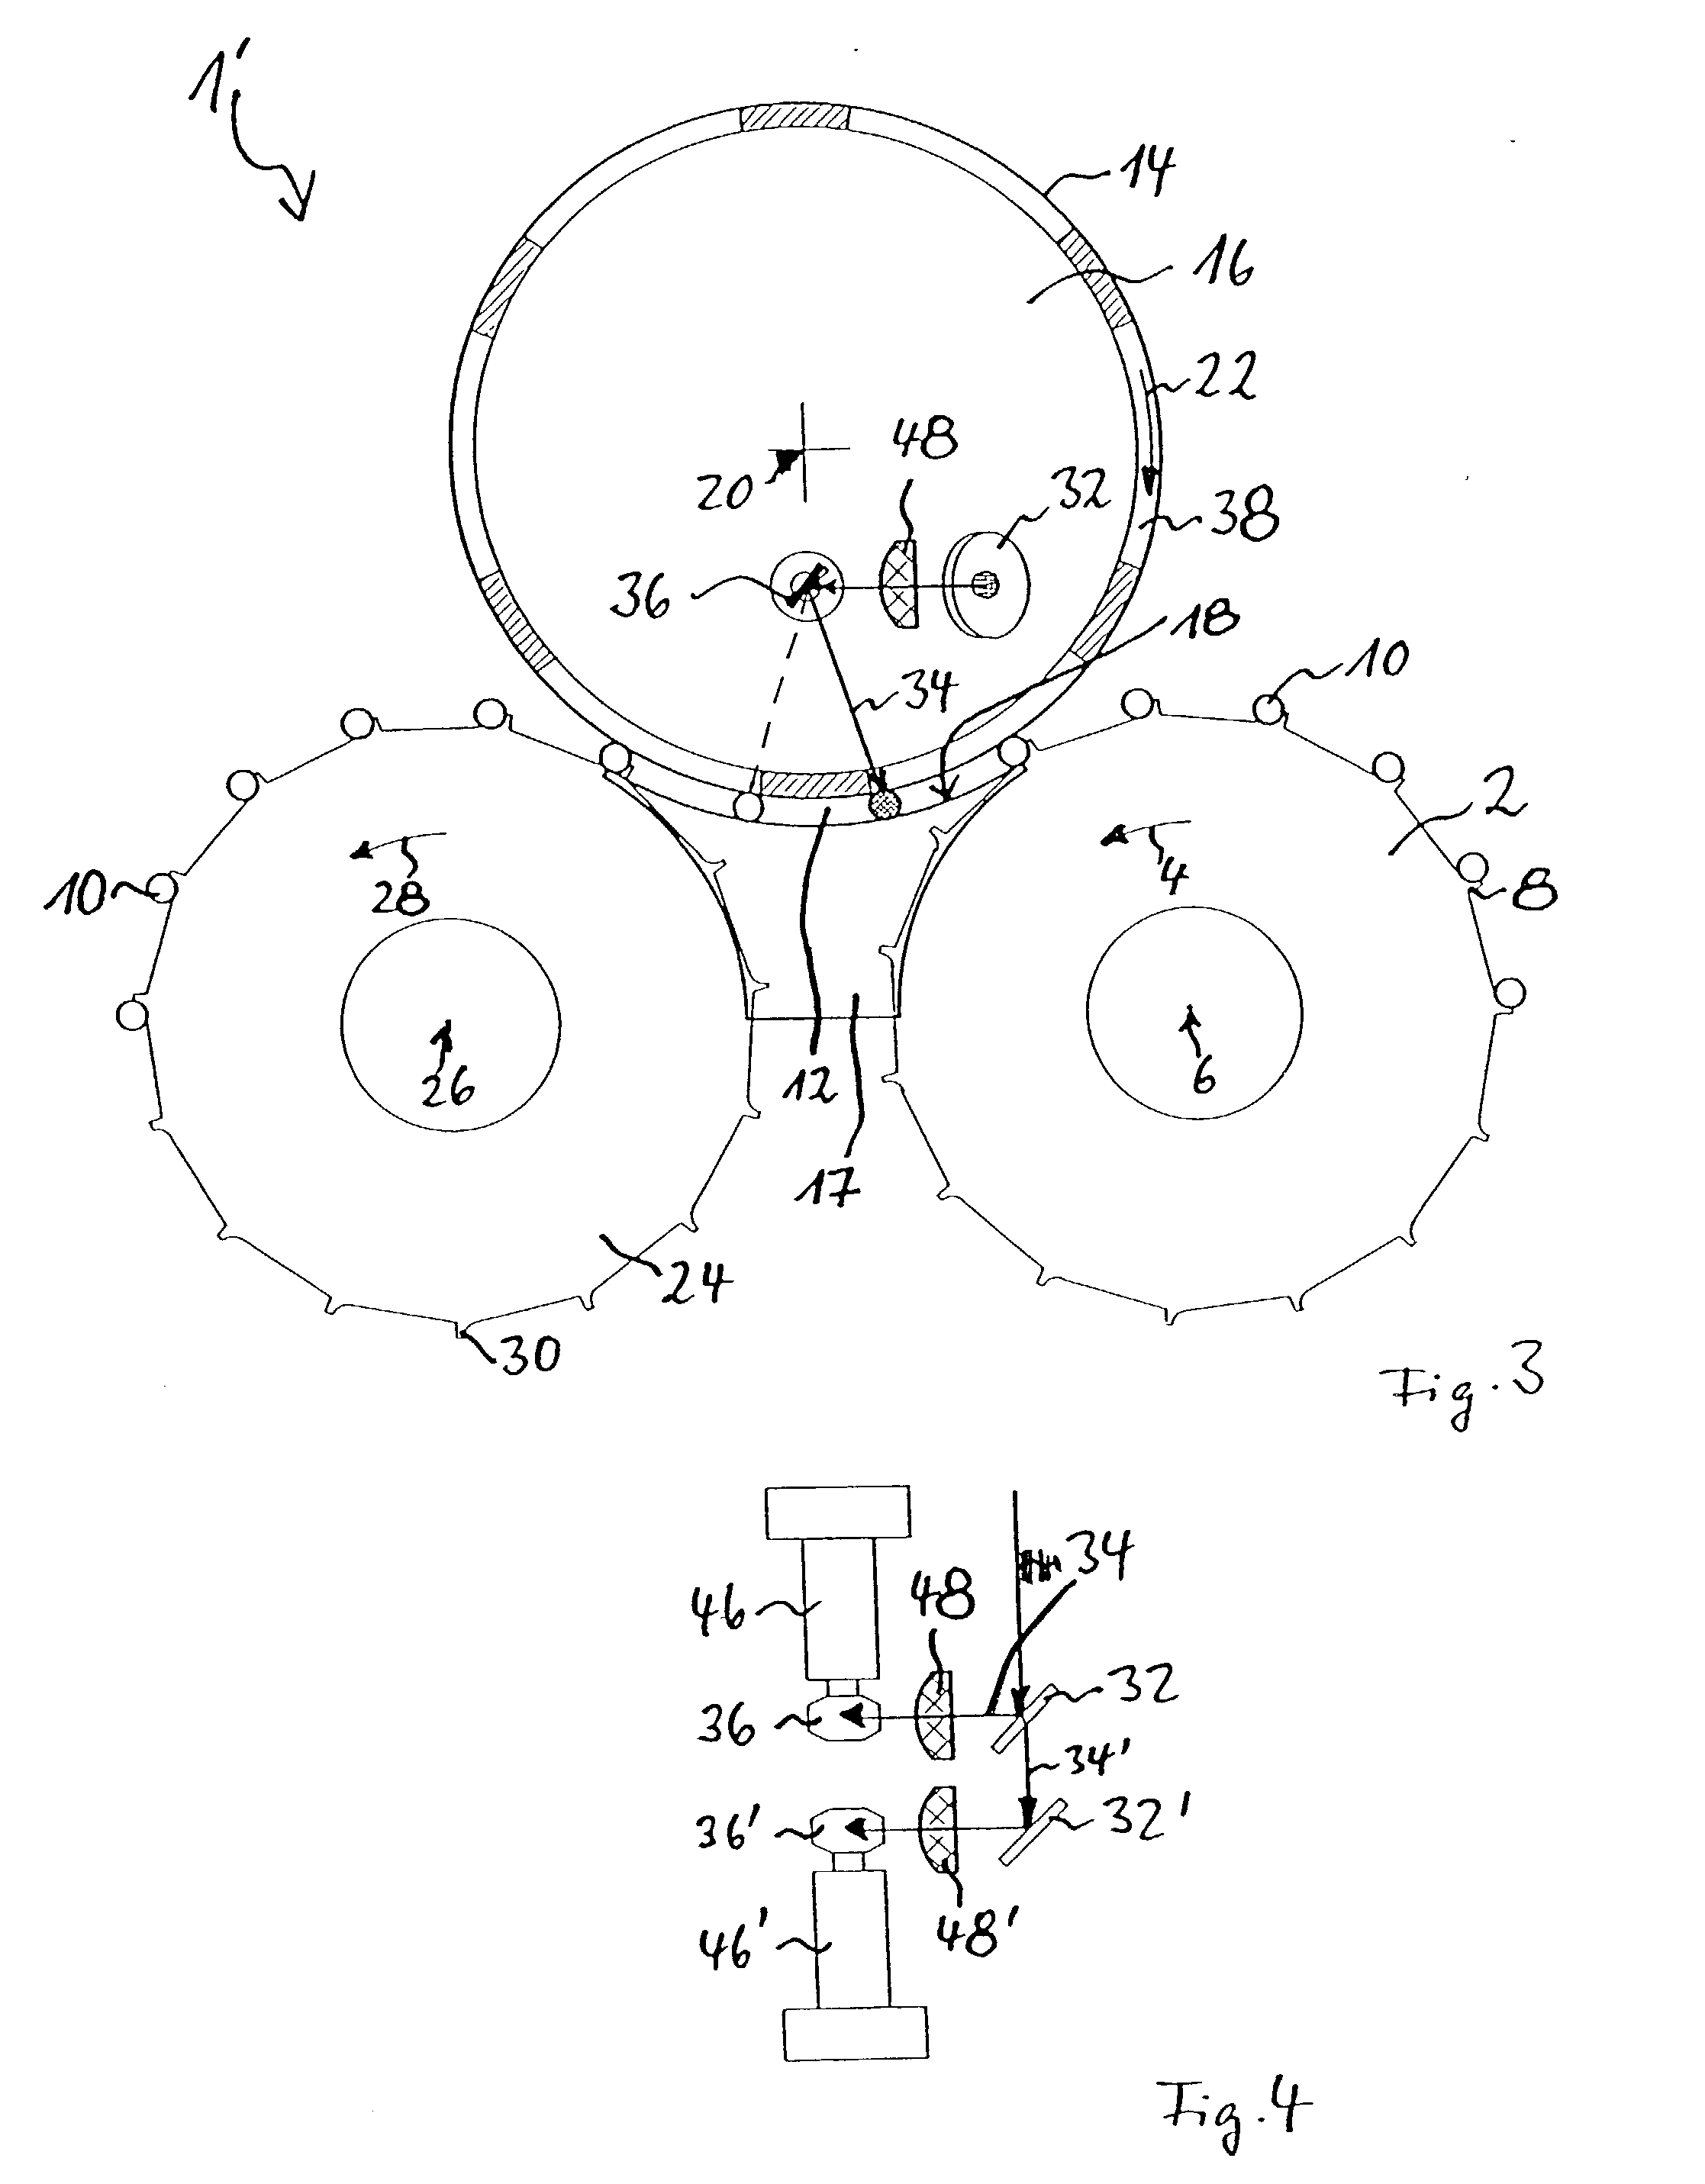 Method of and apparatus for making perforations in the wrappers of rod-shaped products